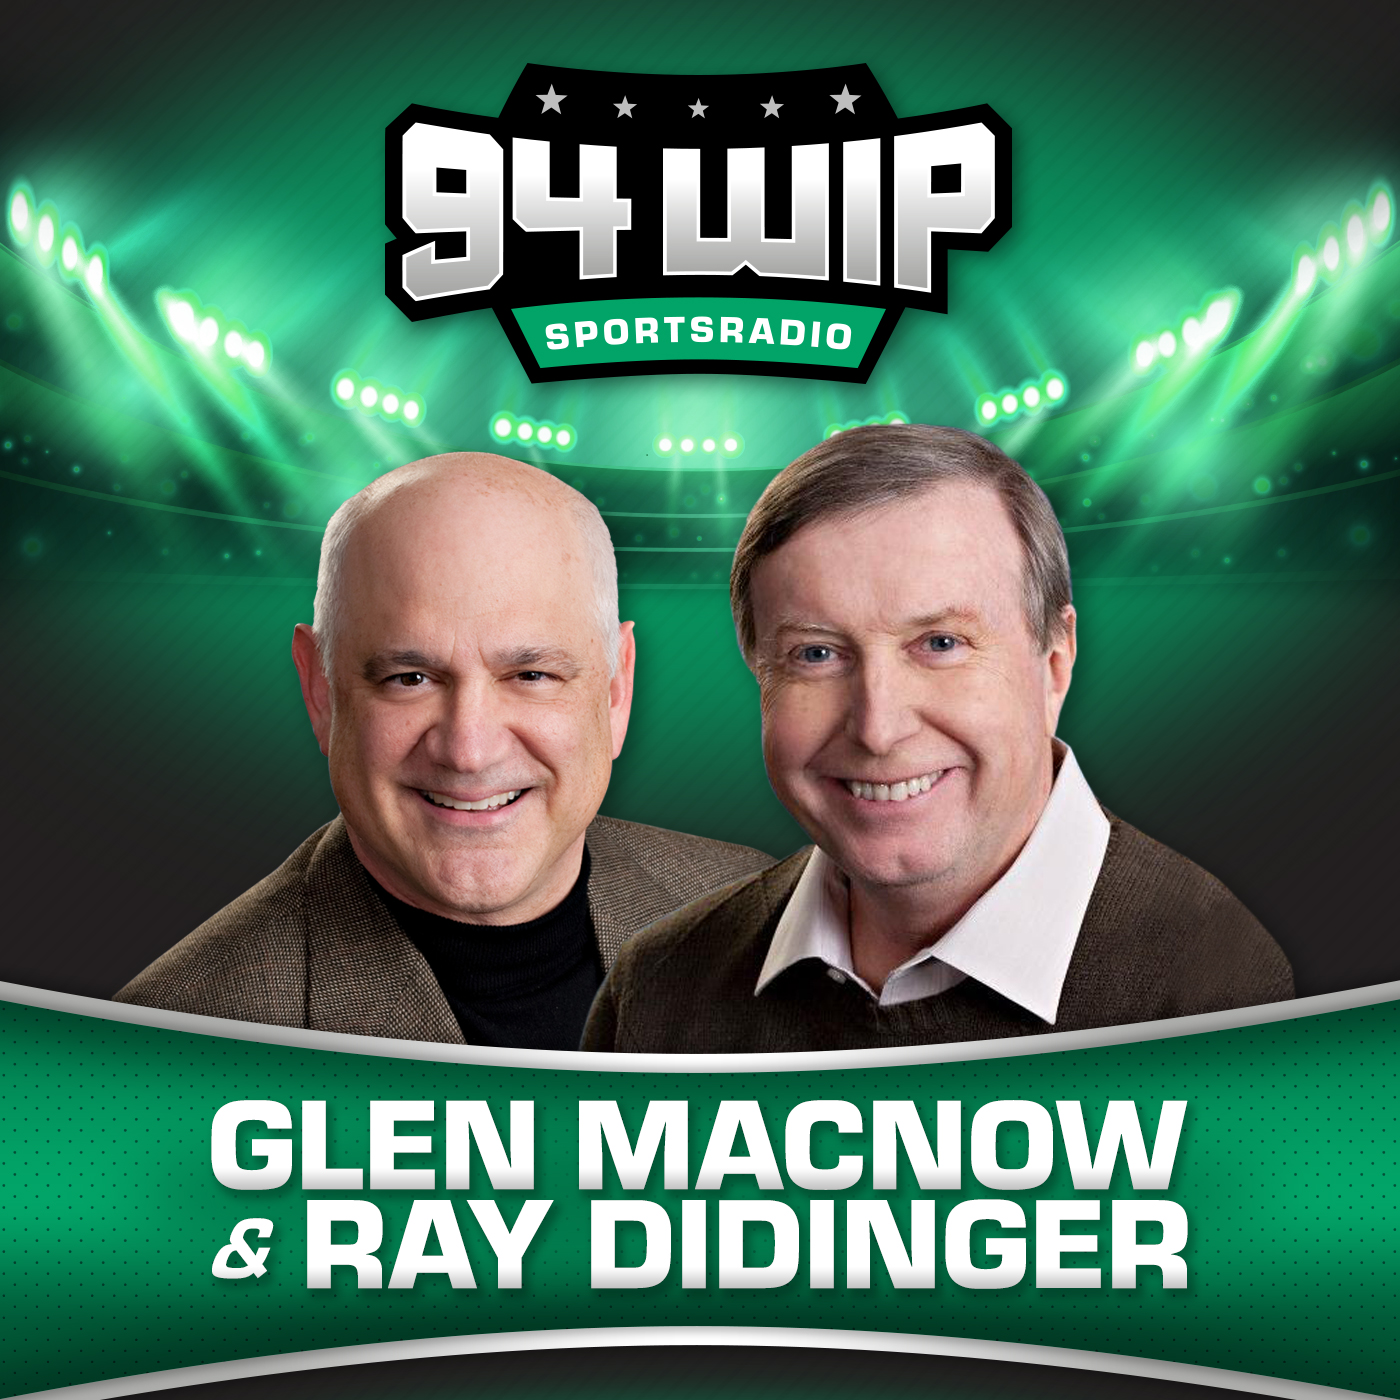 “I Had Floated the Idea of Ray and I Going Out Together” – Glen Macnow Details Process Leading to New WIP Weekend Show